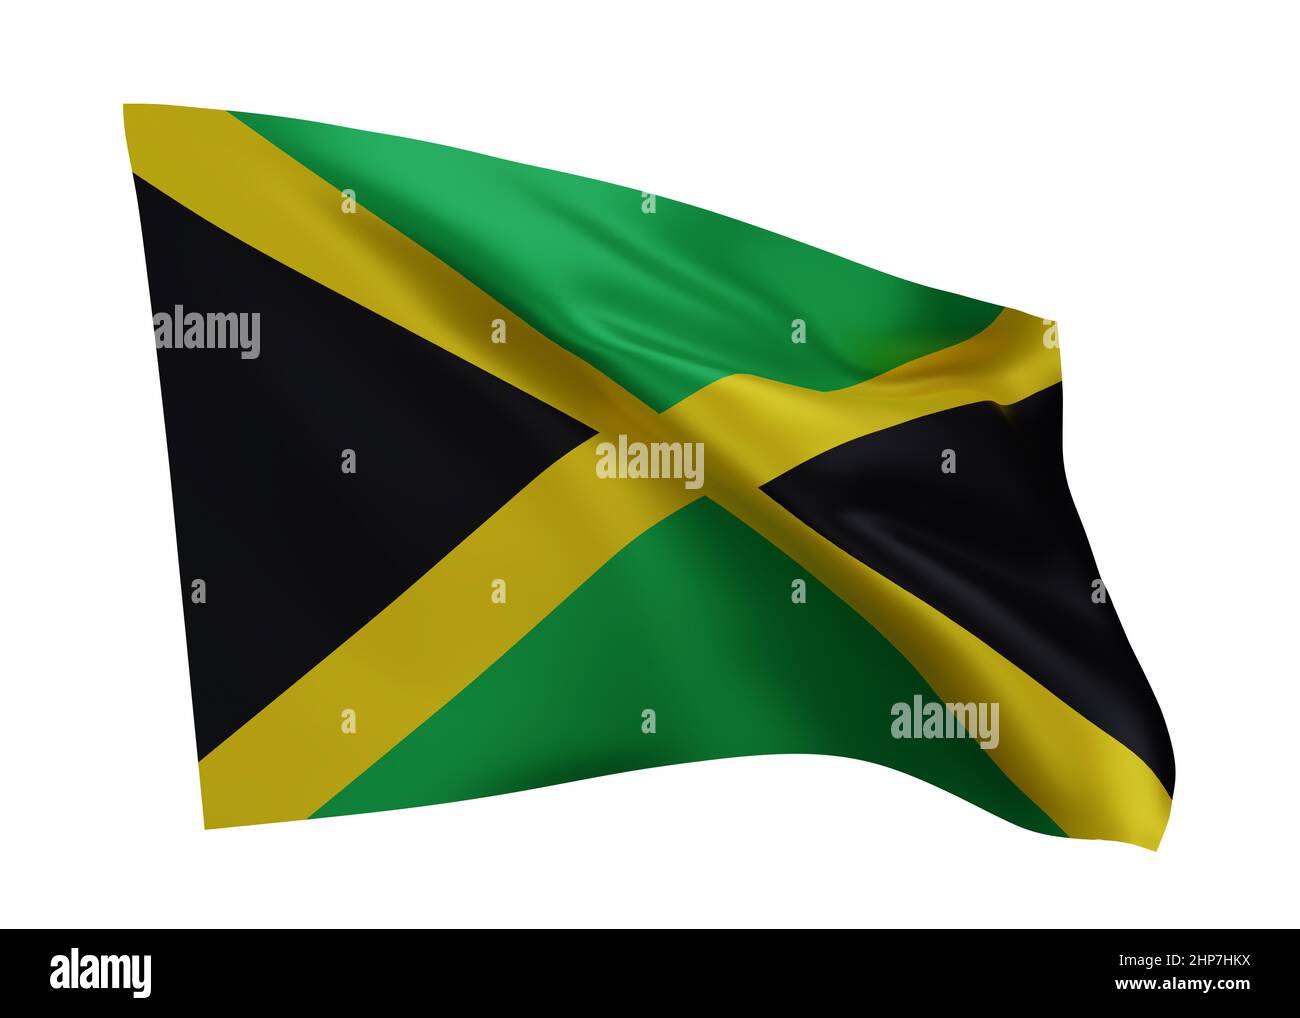 3d illustration flag of Jamaica. Jamaican high resolution flag isolated against white background. 3d rendering Stock Photo